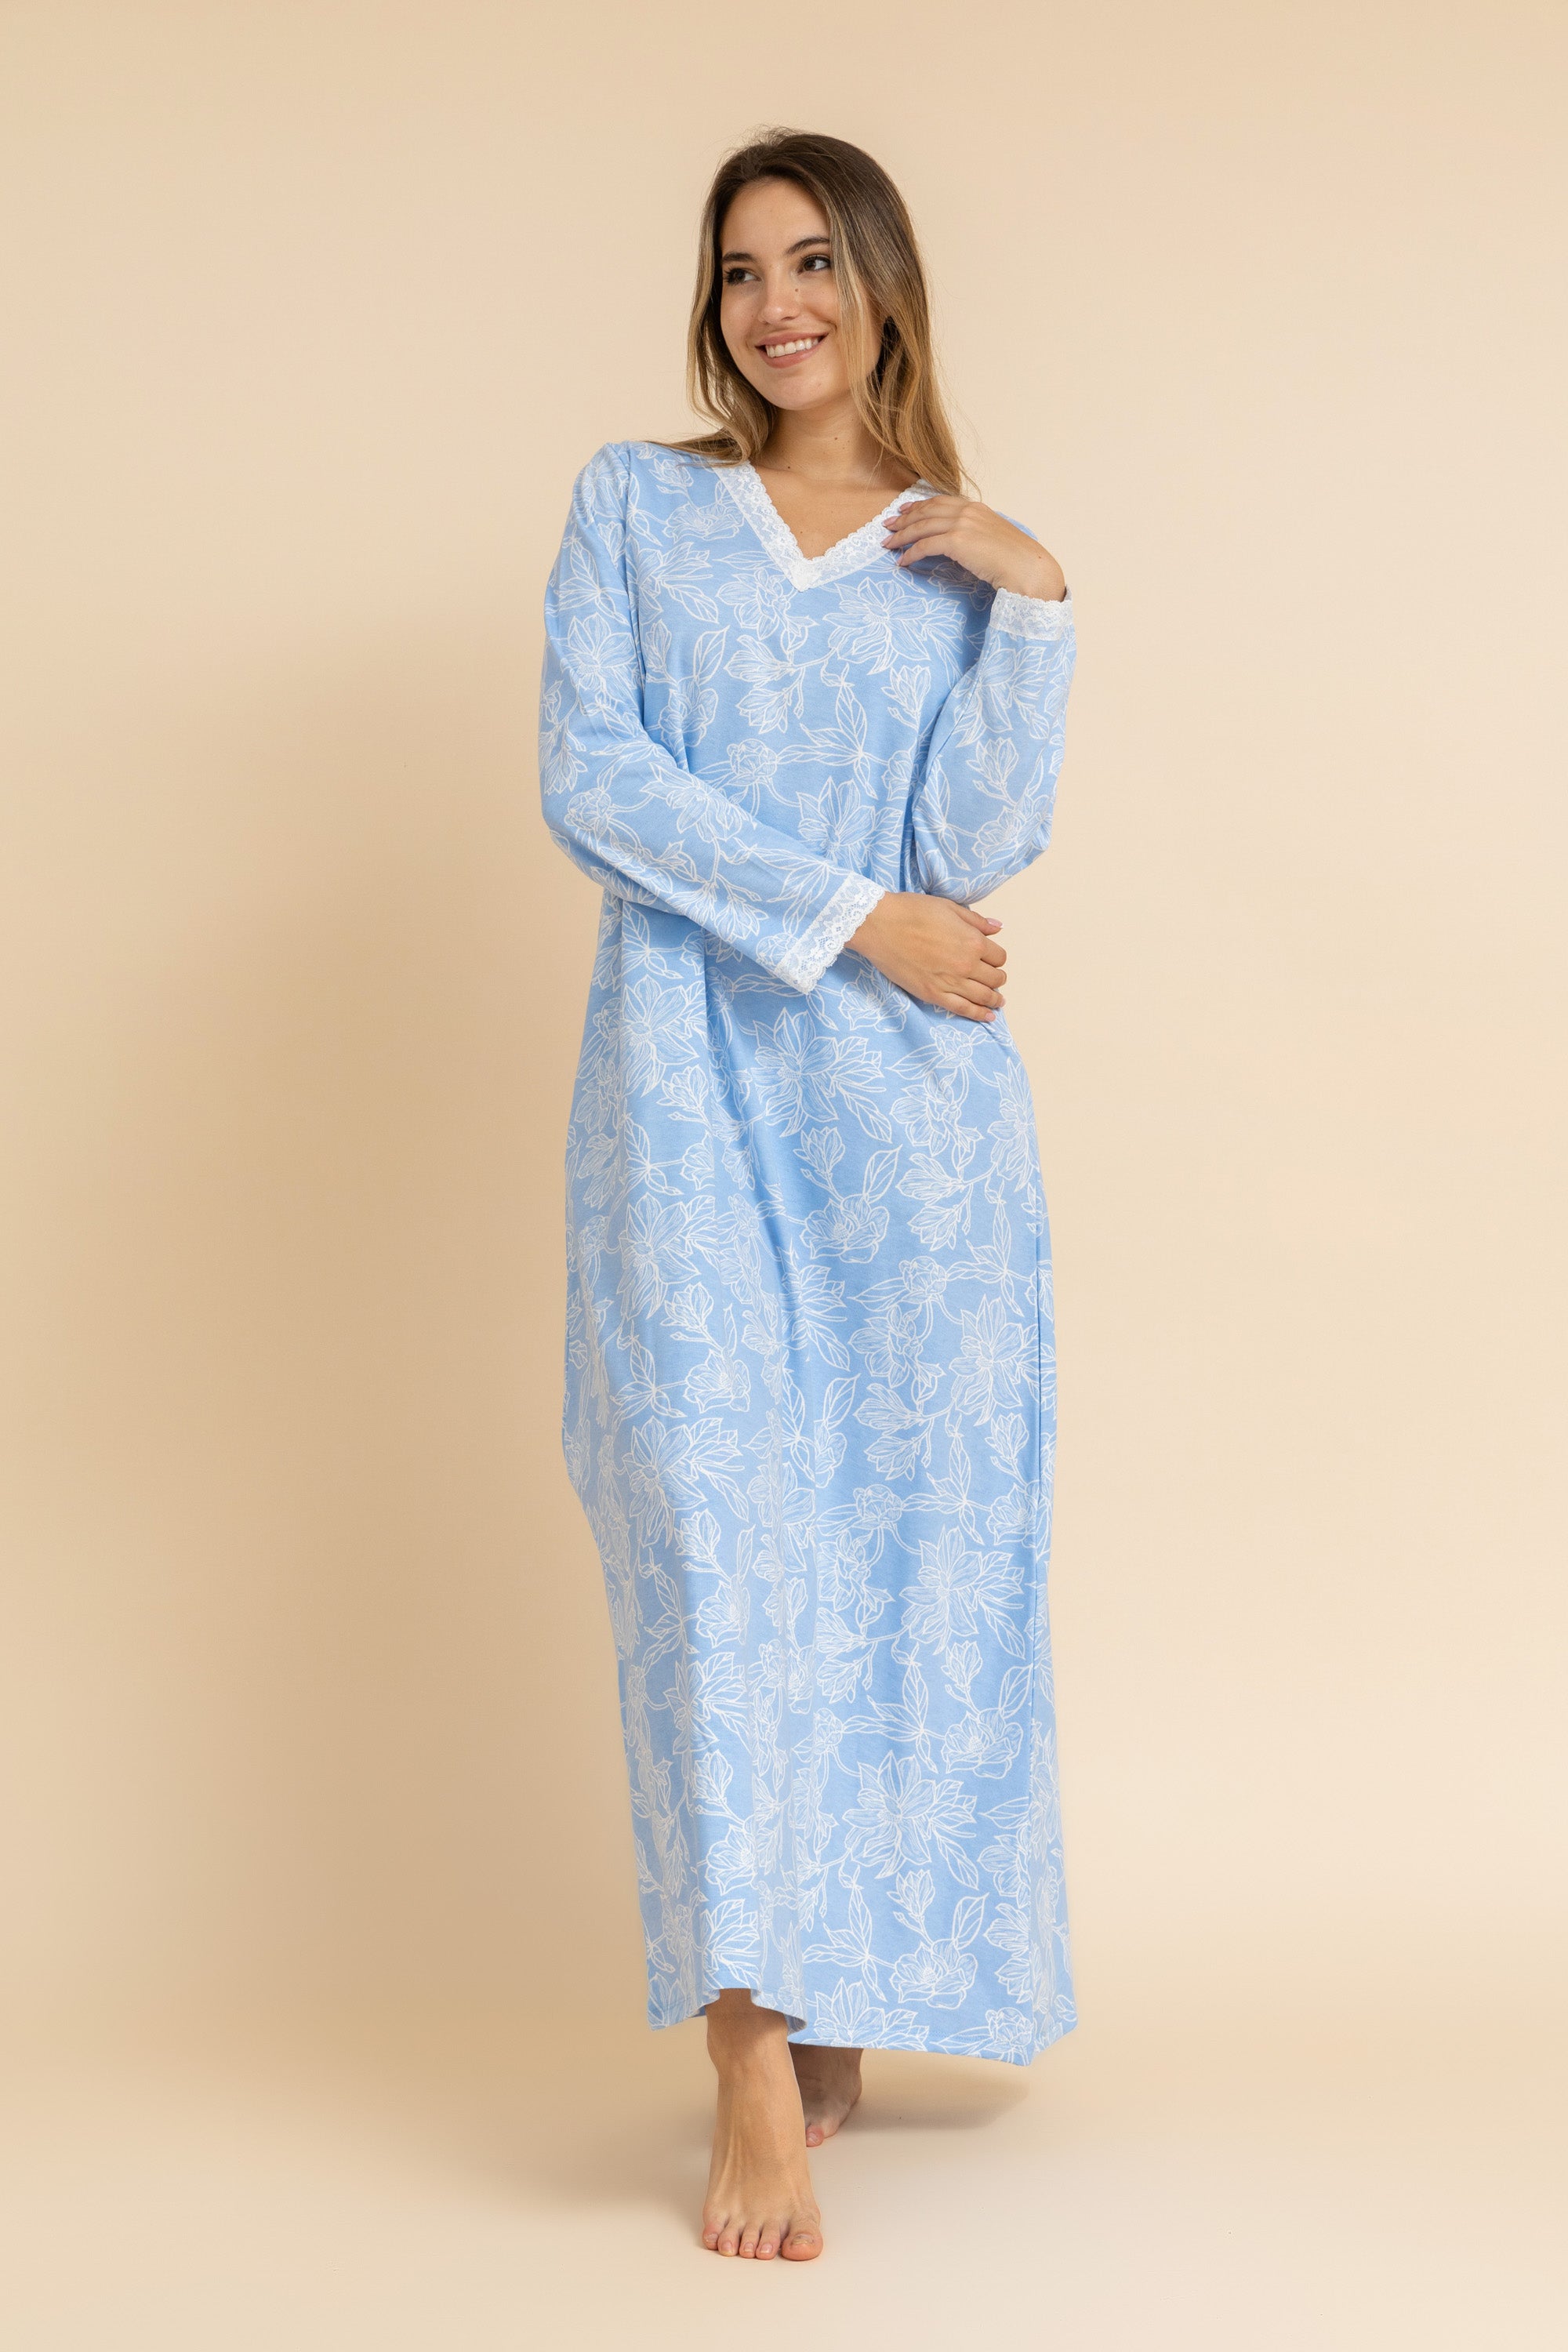 Floral Print 100% cotton nightdress with lace trim